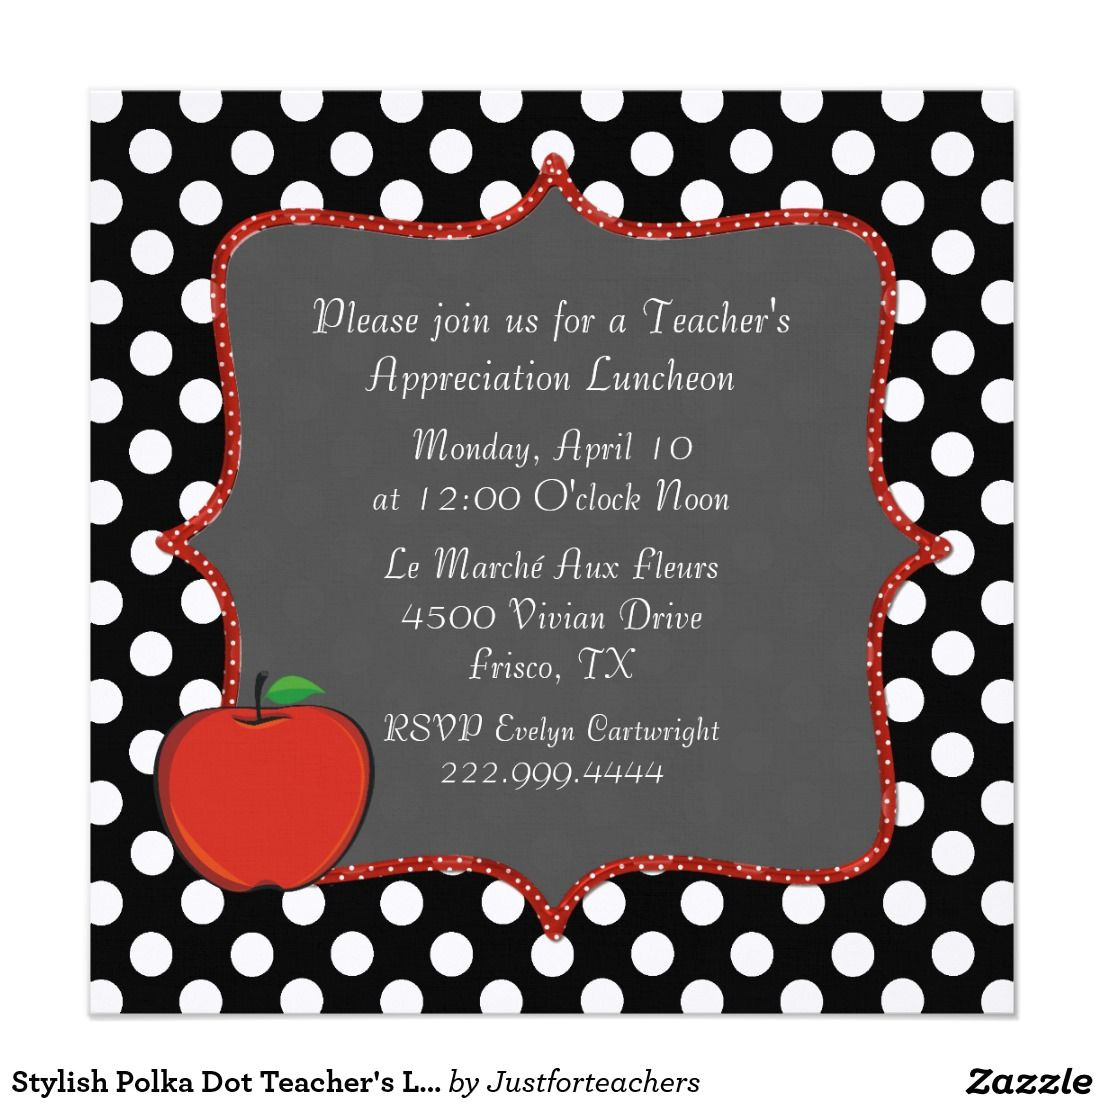 Teachers Day Invitation Card Quotes 102 Best School Invitations and Awards Images School